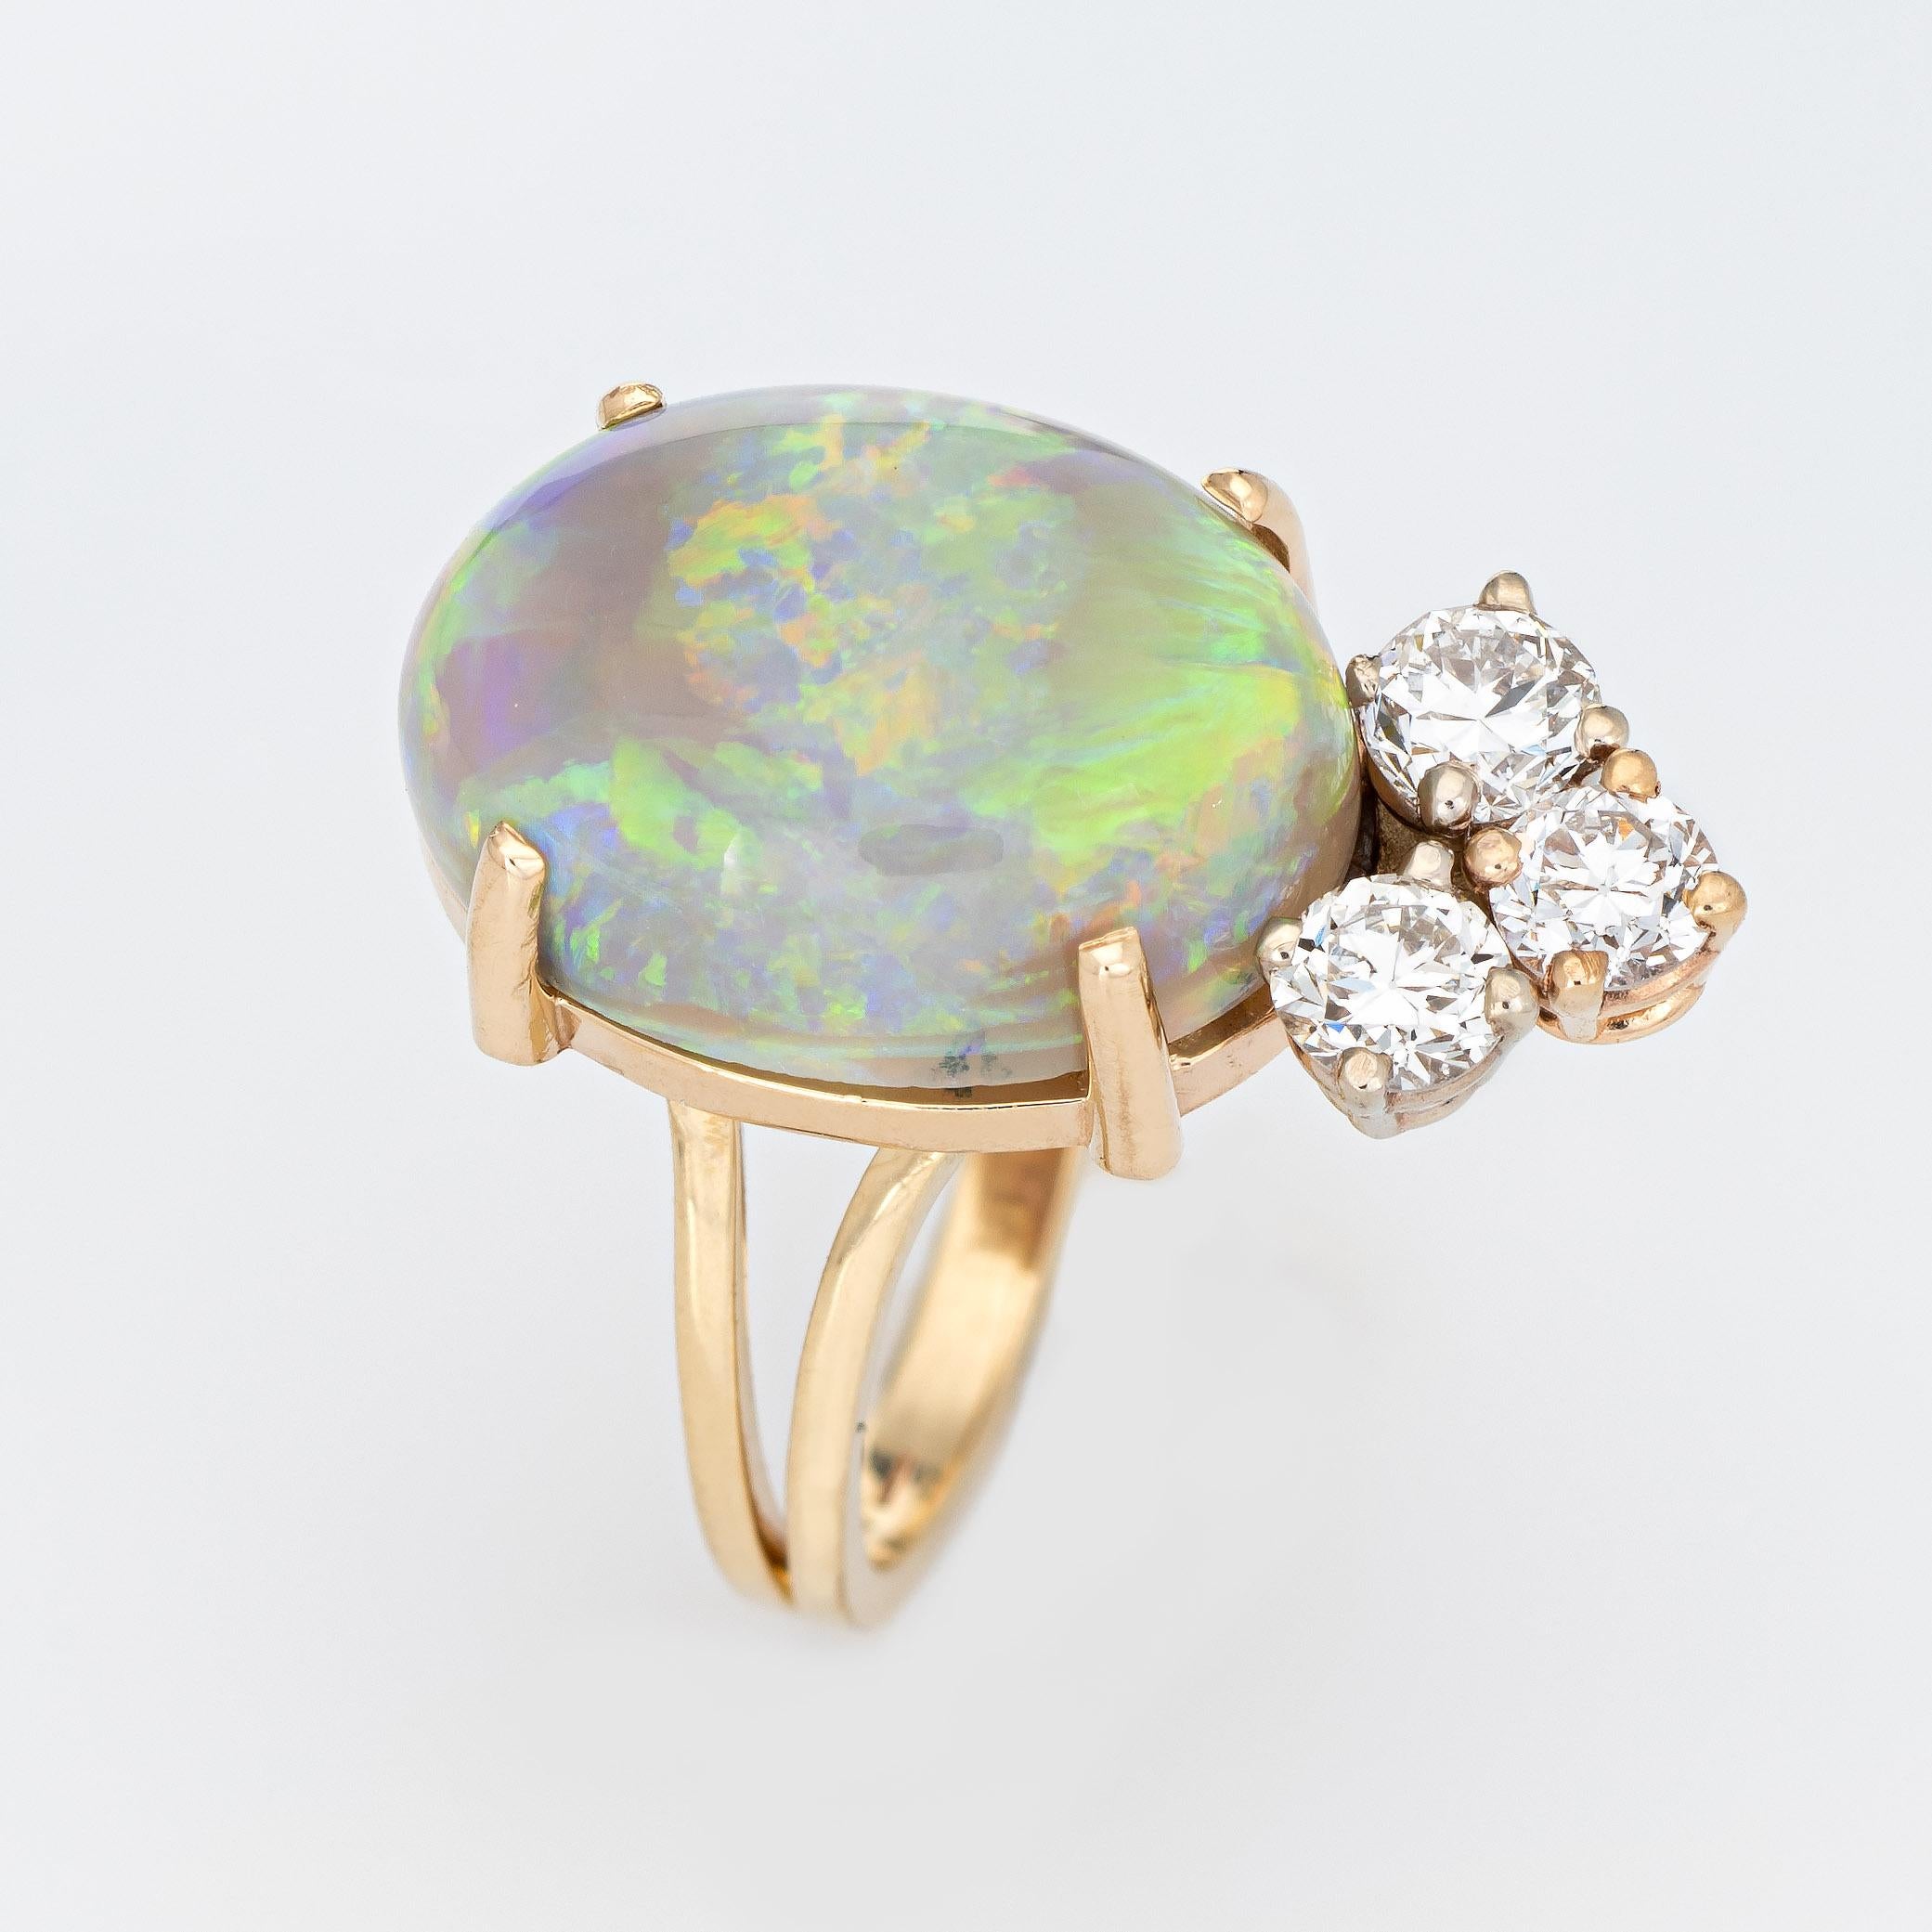 Stylish vintage opal & diamond cocktail ring crafted in 14 karat yellow gold. 

The natural opal measures 15mm x 11mm (estimated at 6.50 carats), accented with three estimated 0.15 carat round brilliant cut diamond. The total diamond weight is